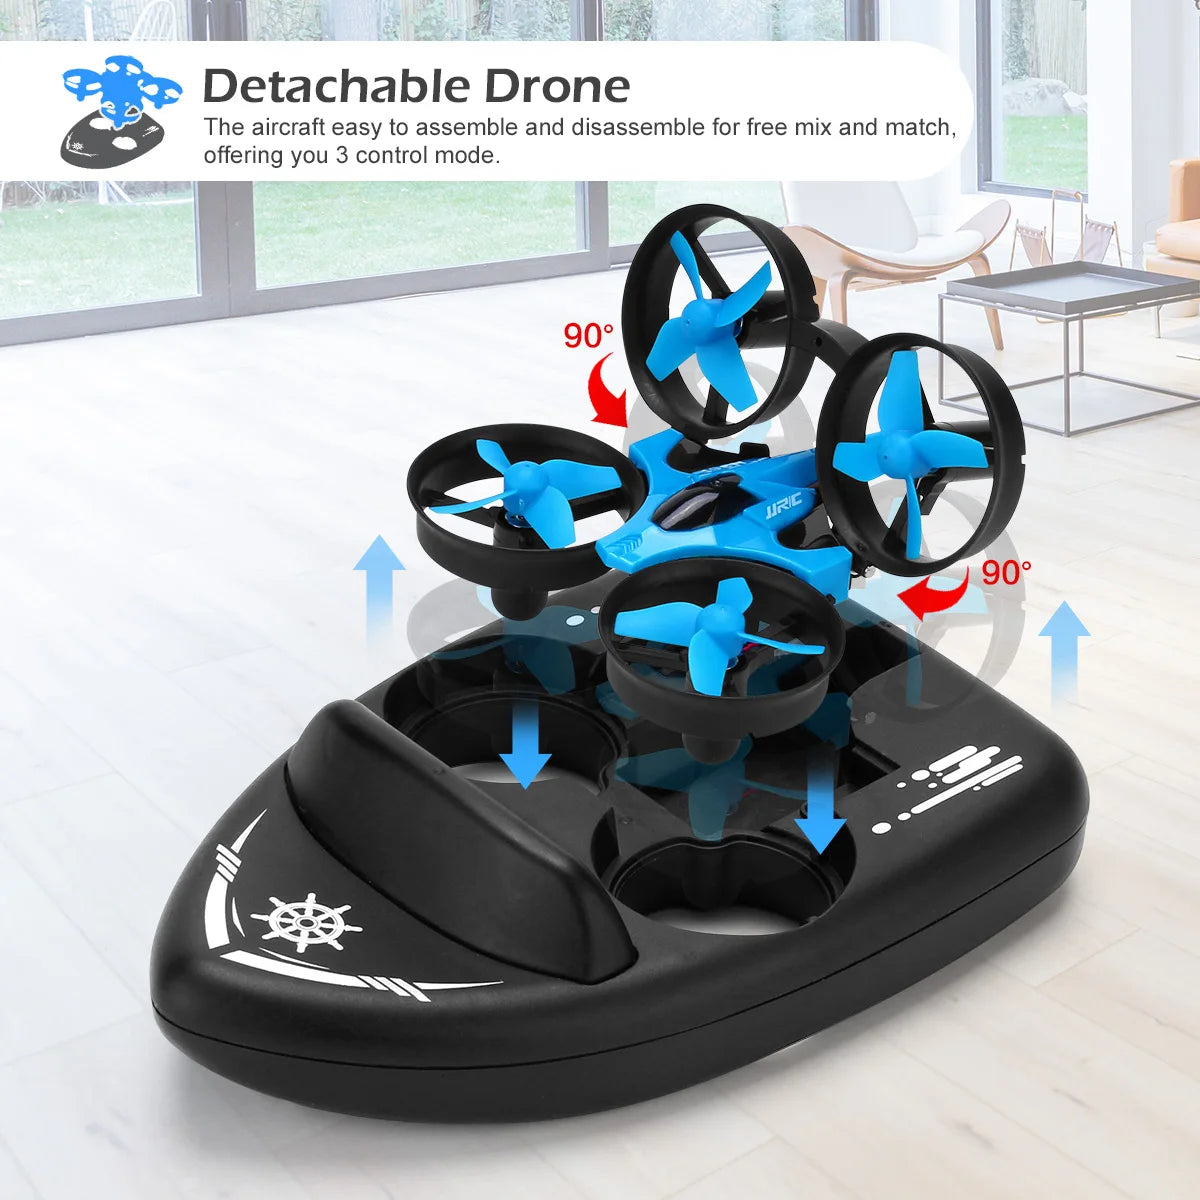 JJRC H36F RC Mini Drone, detachable drone easy to assemble and disassemble for free